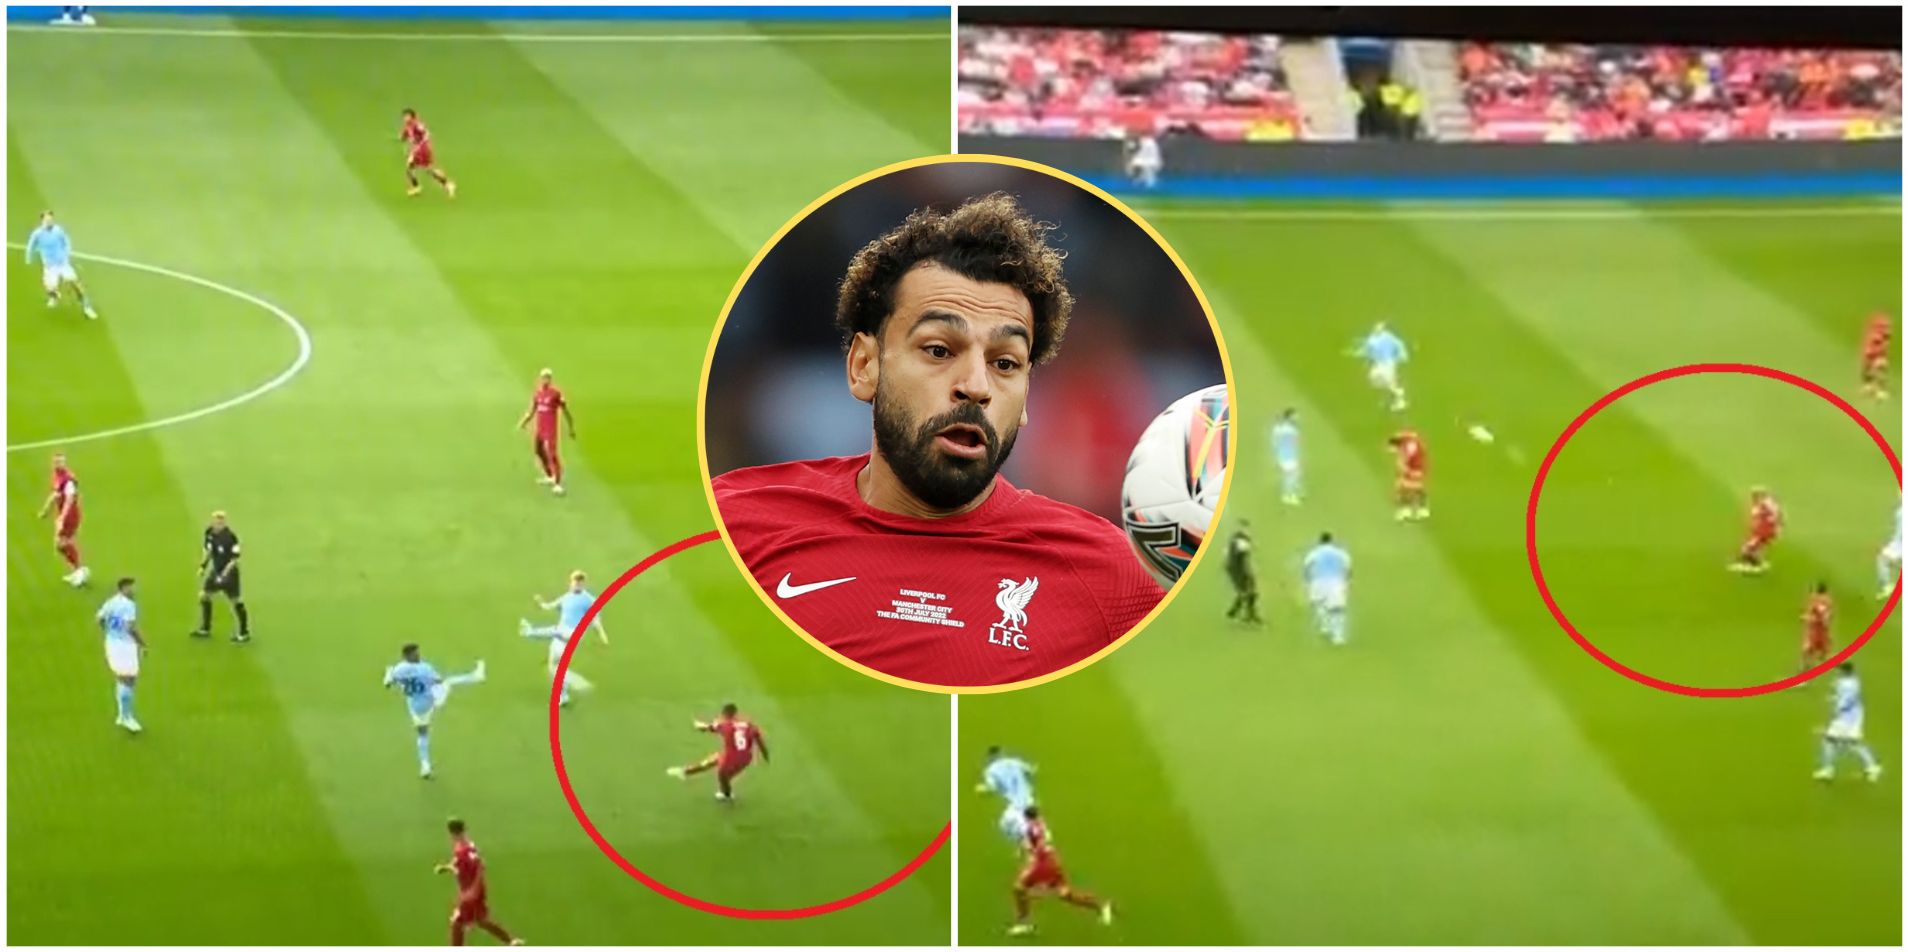 (Video) Two unreal long balls from Fabinho & Thiago to Salah will have fans drooling